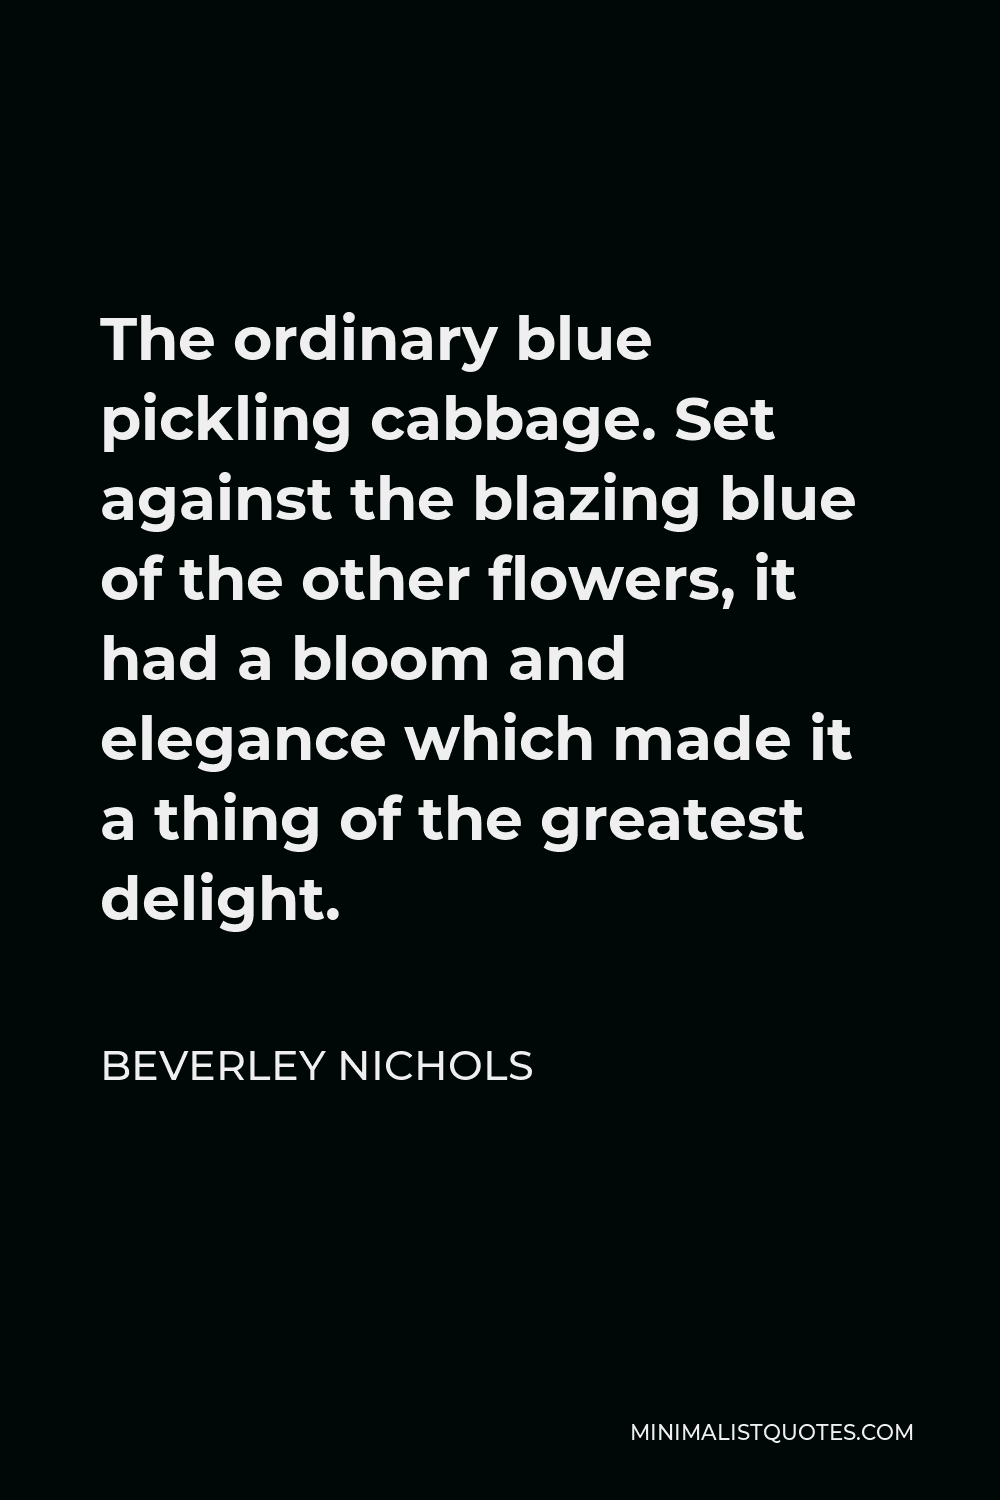 Beverley Nichols Quote - The ordinary blue pickling cabbage. Set against the blazing blue of the other flowers, it had a bloom and elegance which made it a thing of the greatest delight.